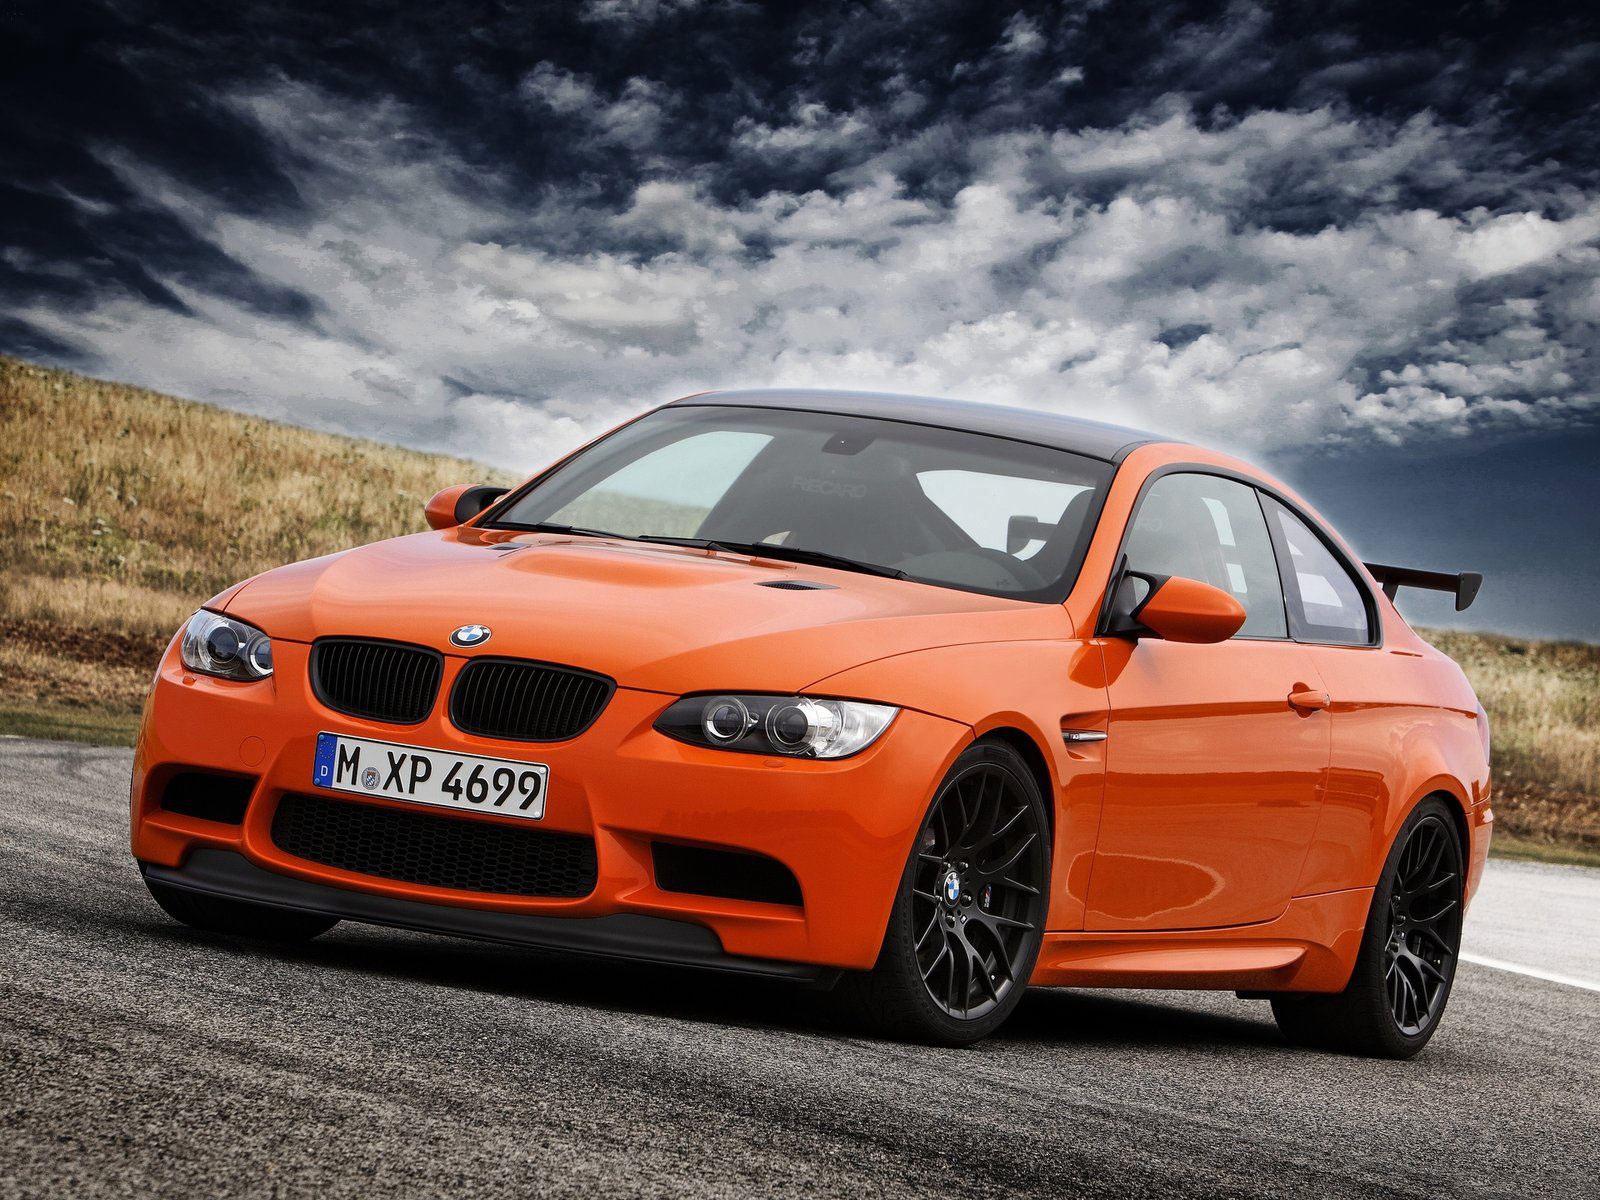 2011 BMW M3 GTS car pictures.Insurance,accident lawyers info